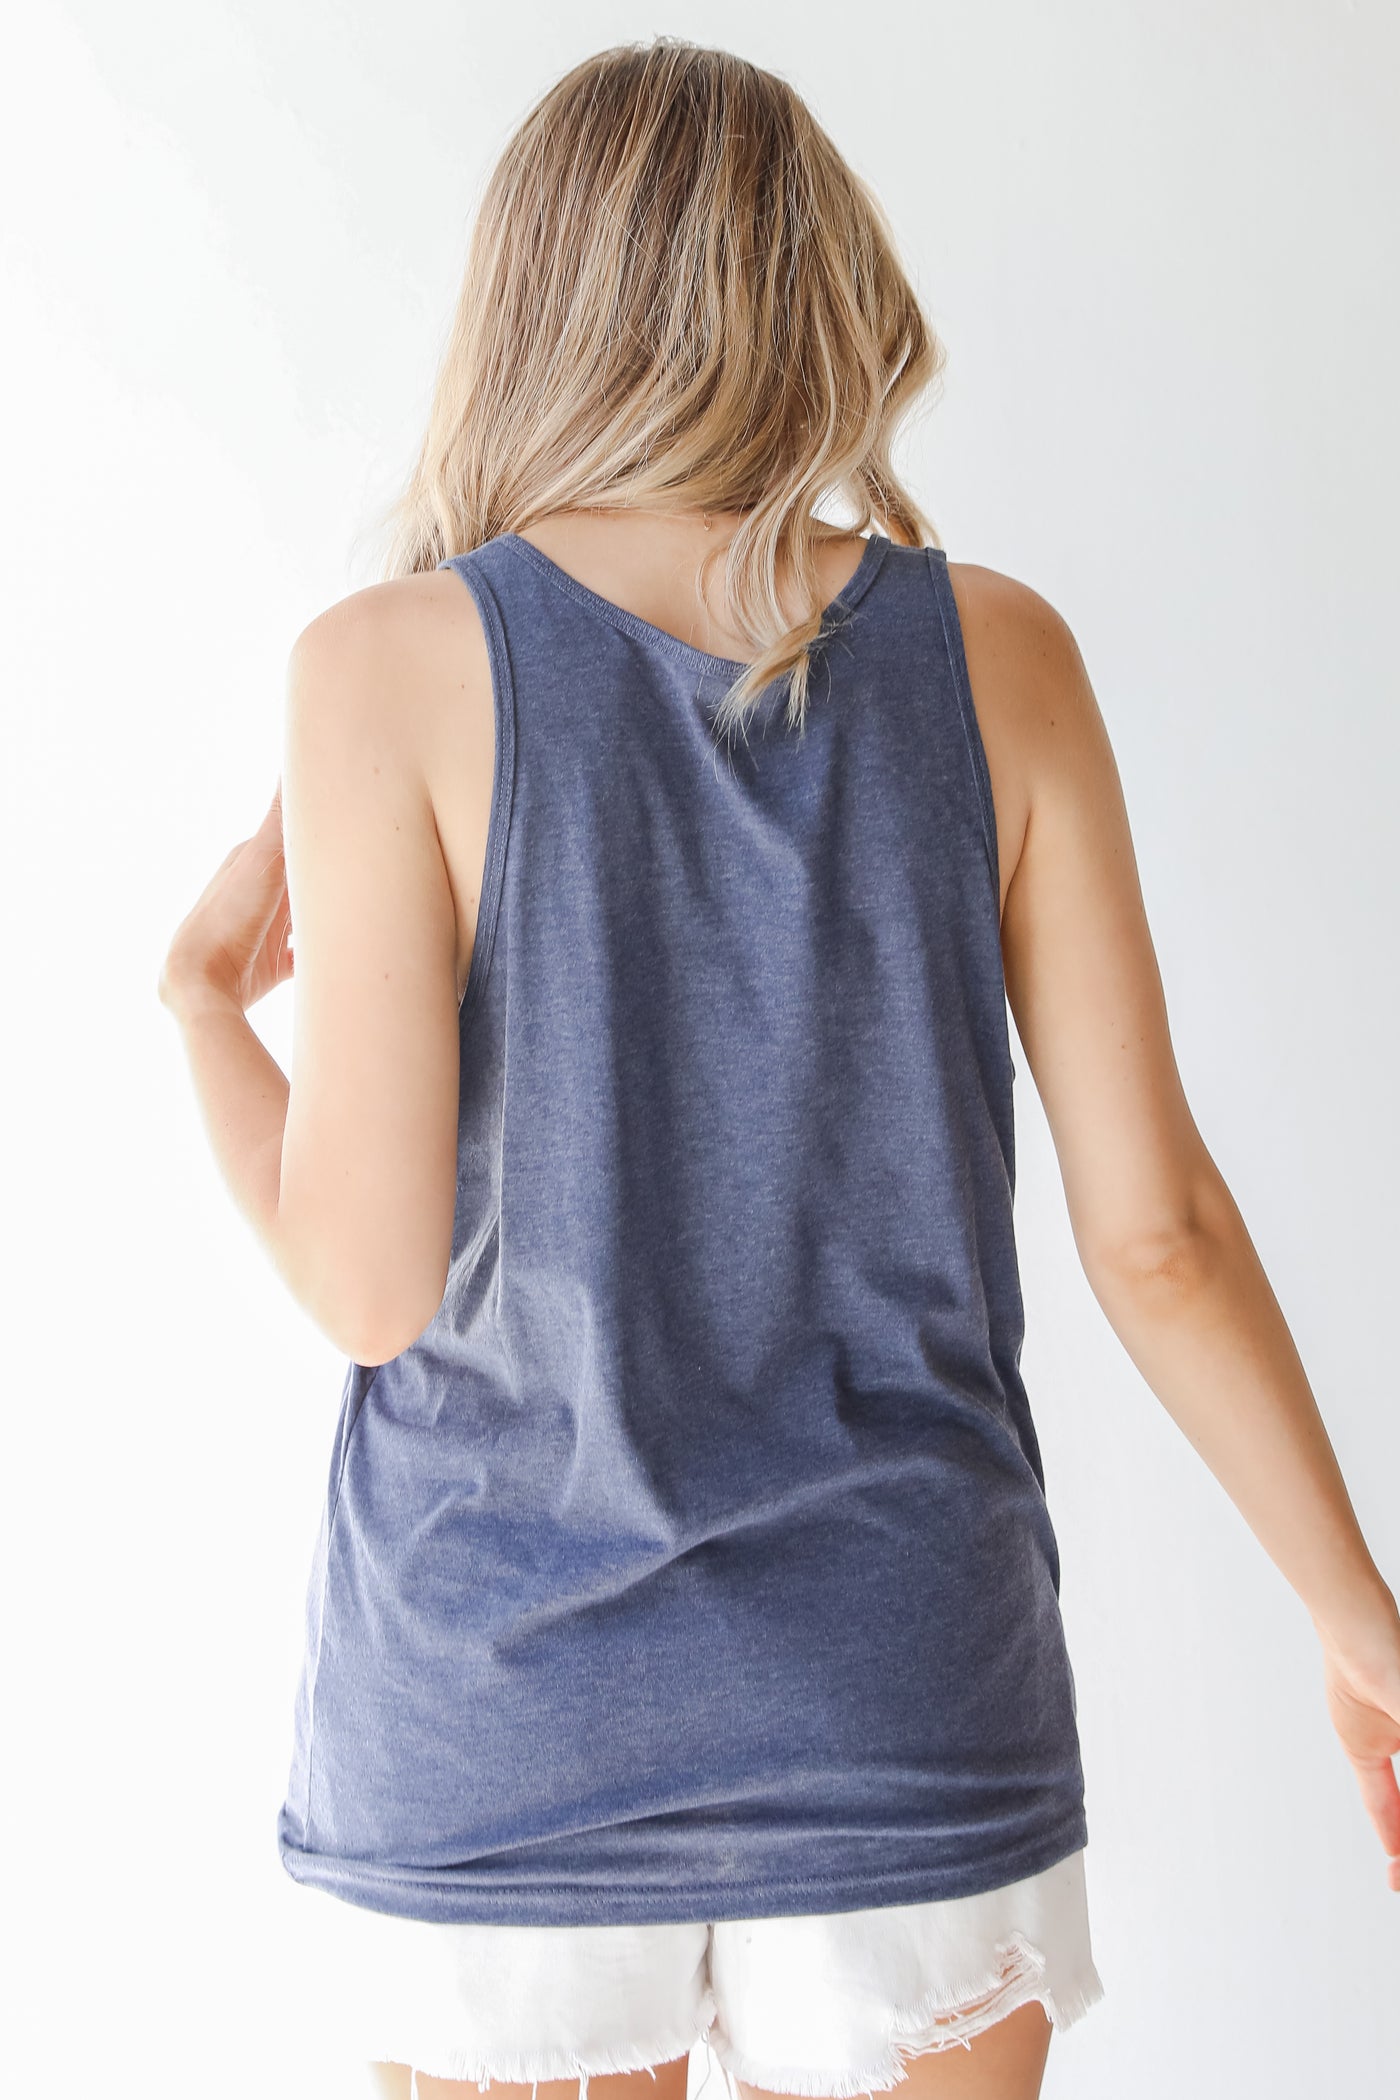 Chop Chop Graphic Tank in navy back view